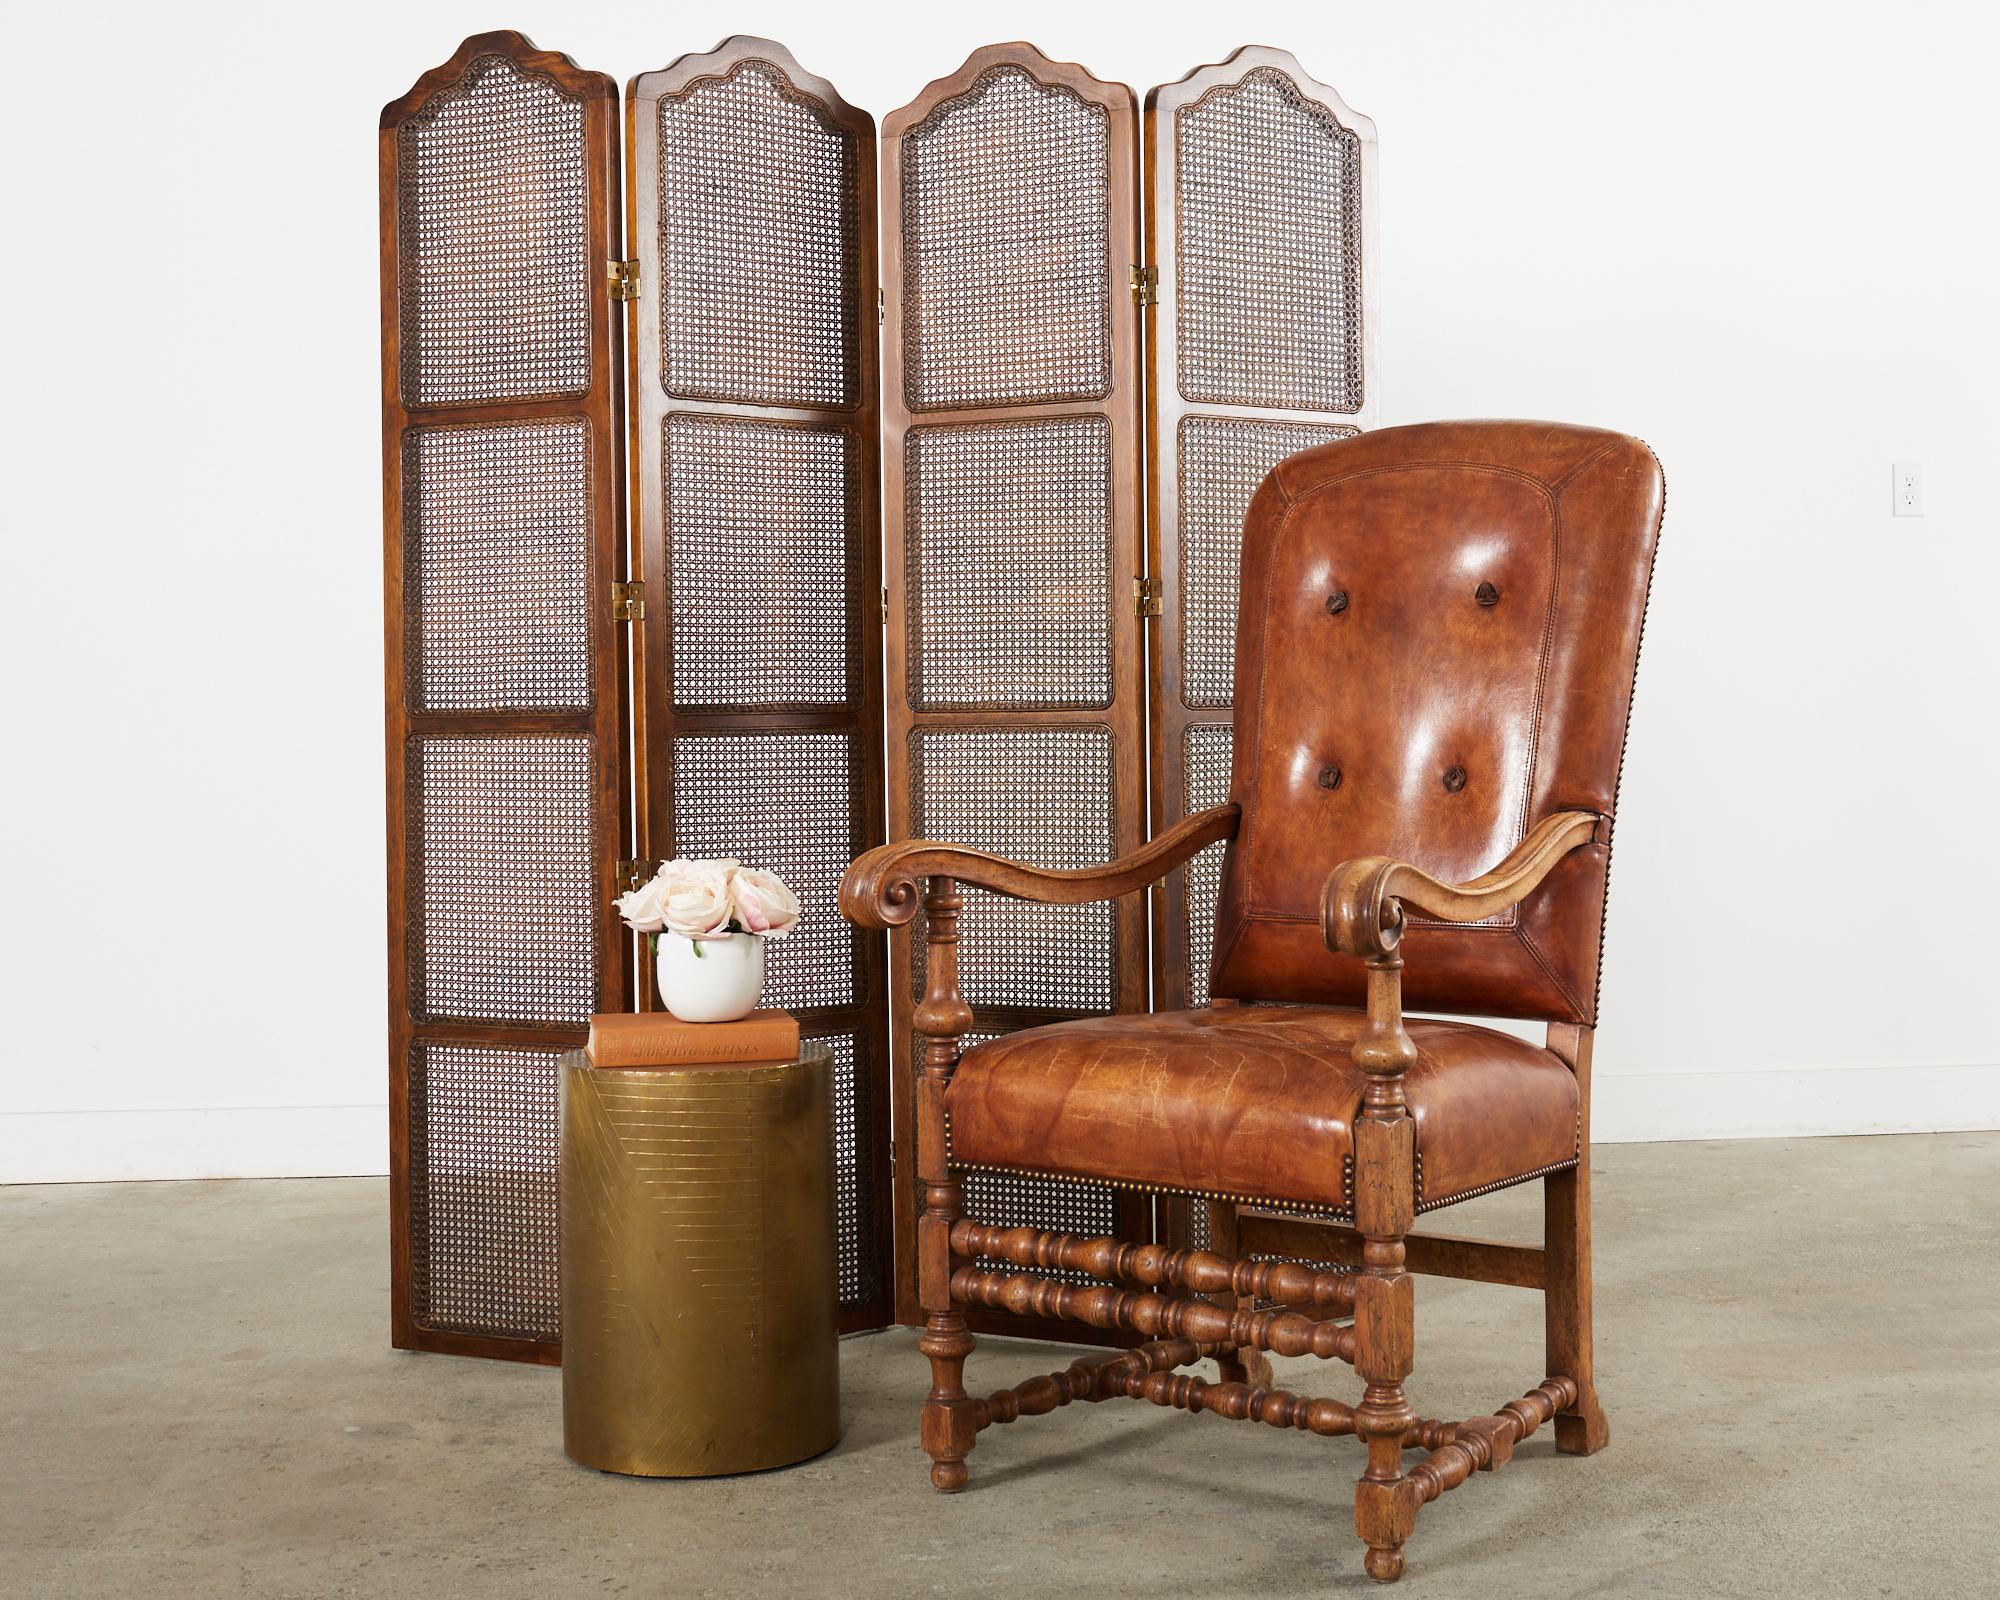 Grand hardwood and leather library armchair designed by Hendrix Allardyce in the Italian Baroque taste. The monumental chair features a hand-carved hardwood frame with large molded arms that gracefully curve and end with scrolled hands. The generous